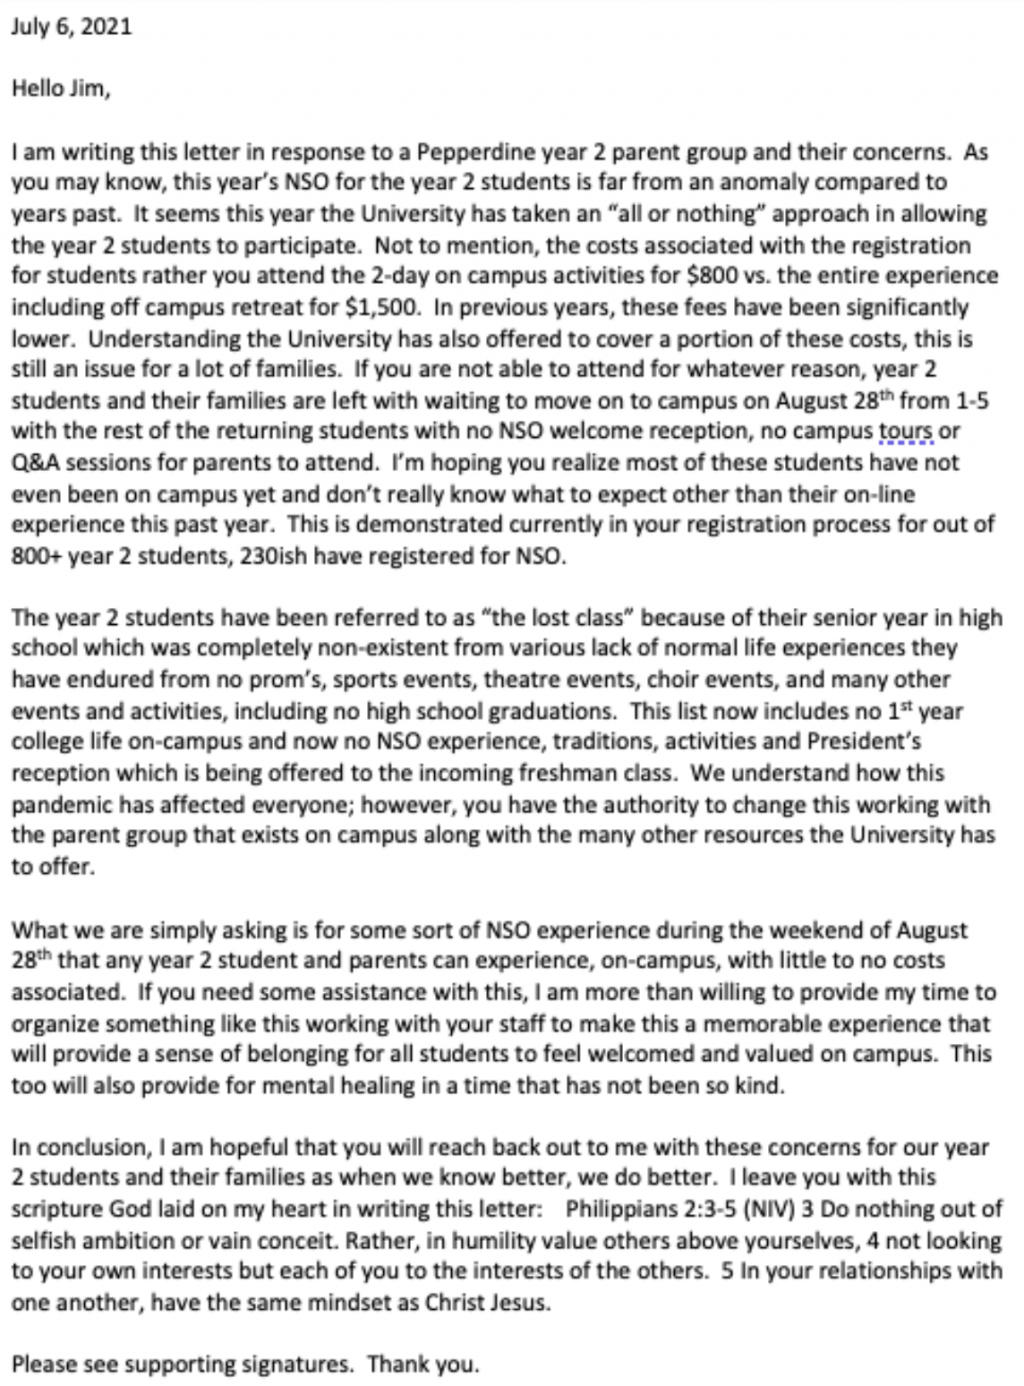 Parents of Pepperdine's rising sophomores sent this letter to President Jim Gash to voice opinions regarding the Year 2 Welcome. Anisha Jackson authored the letter, and 27 other parents added signatures. Photo Courtesy of Anisha Jackson